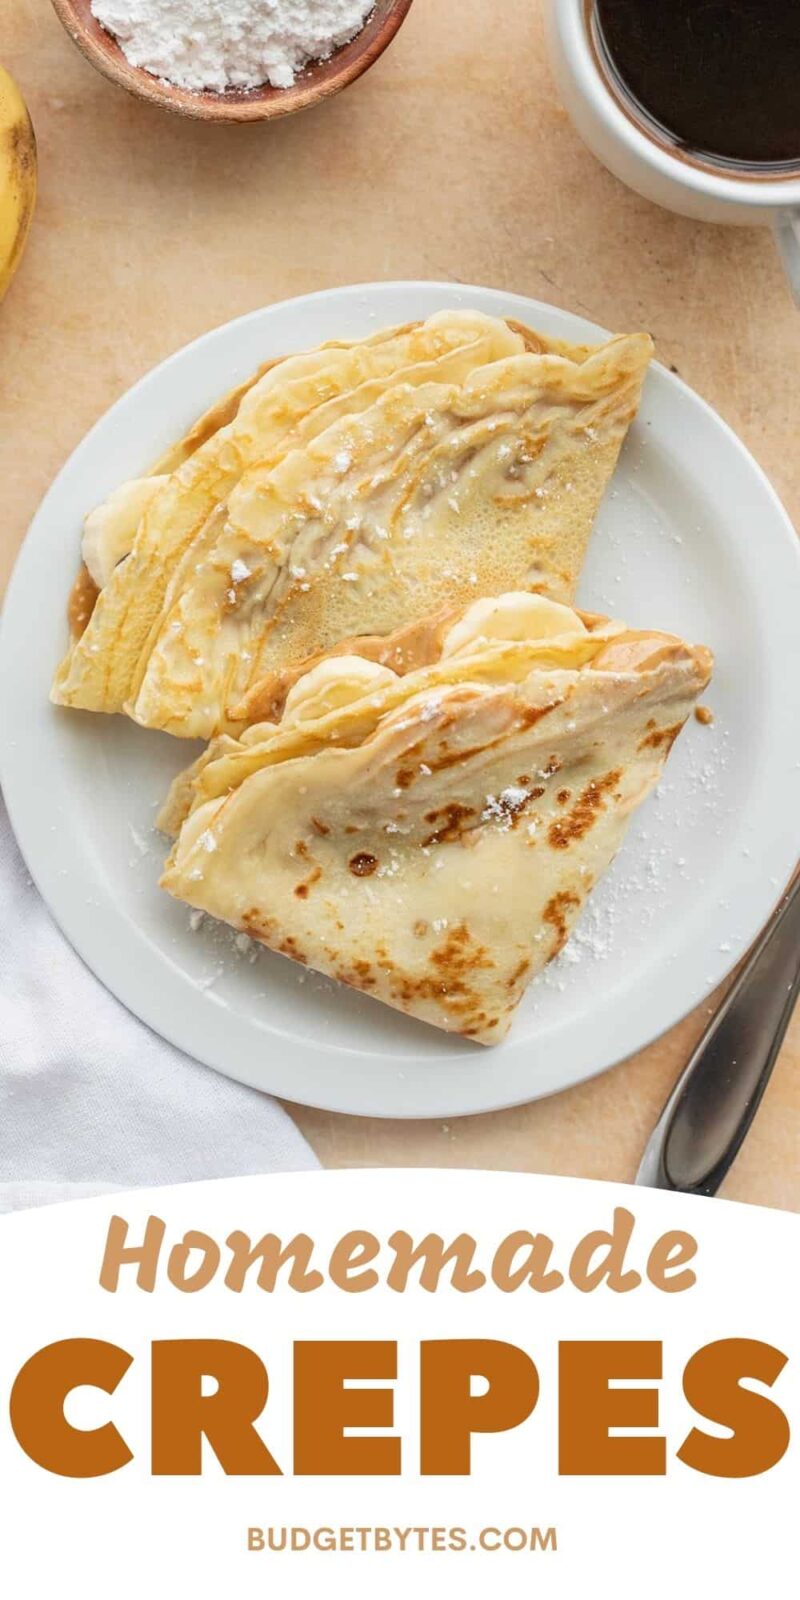 Two filled and folded crepes on a plate from above.